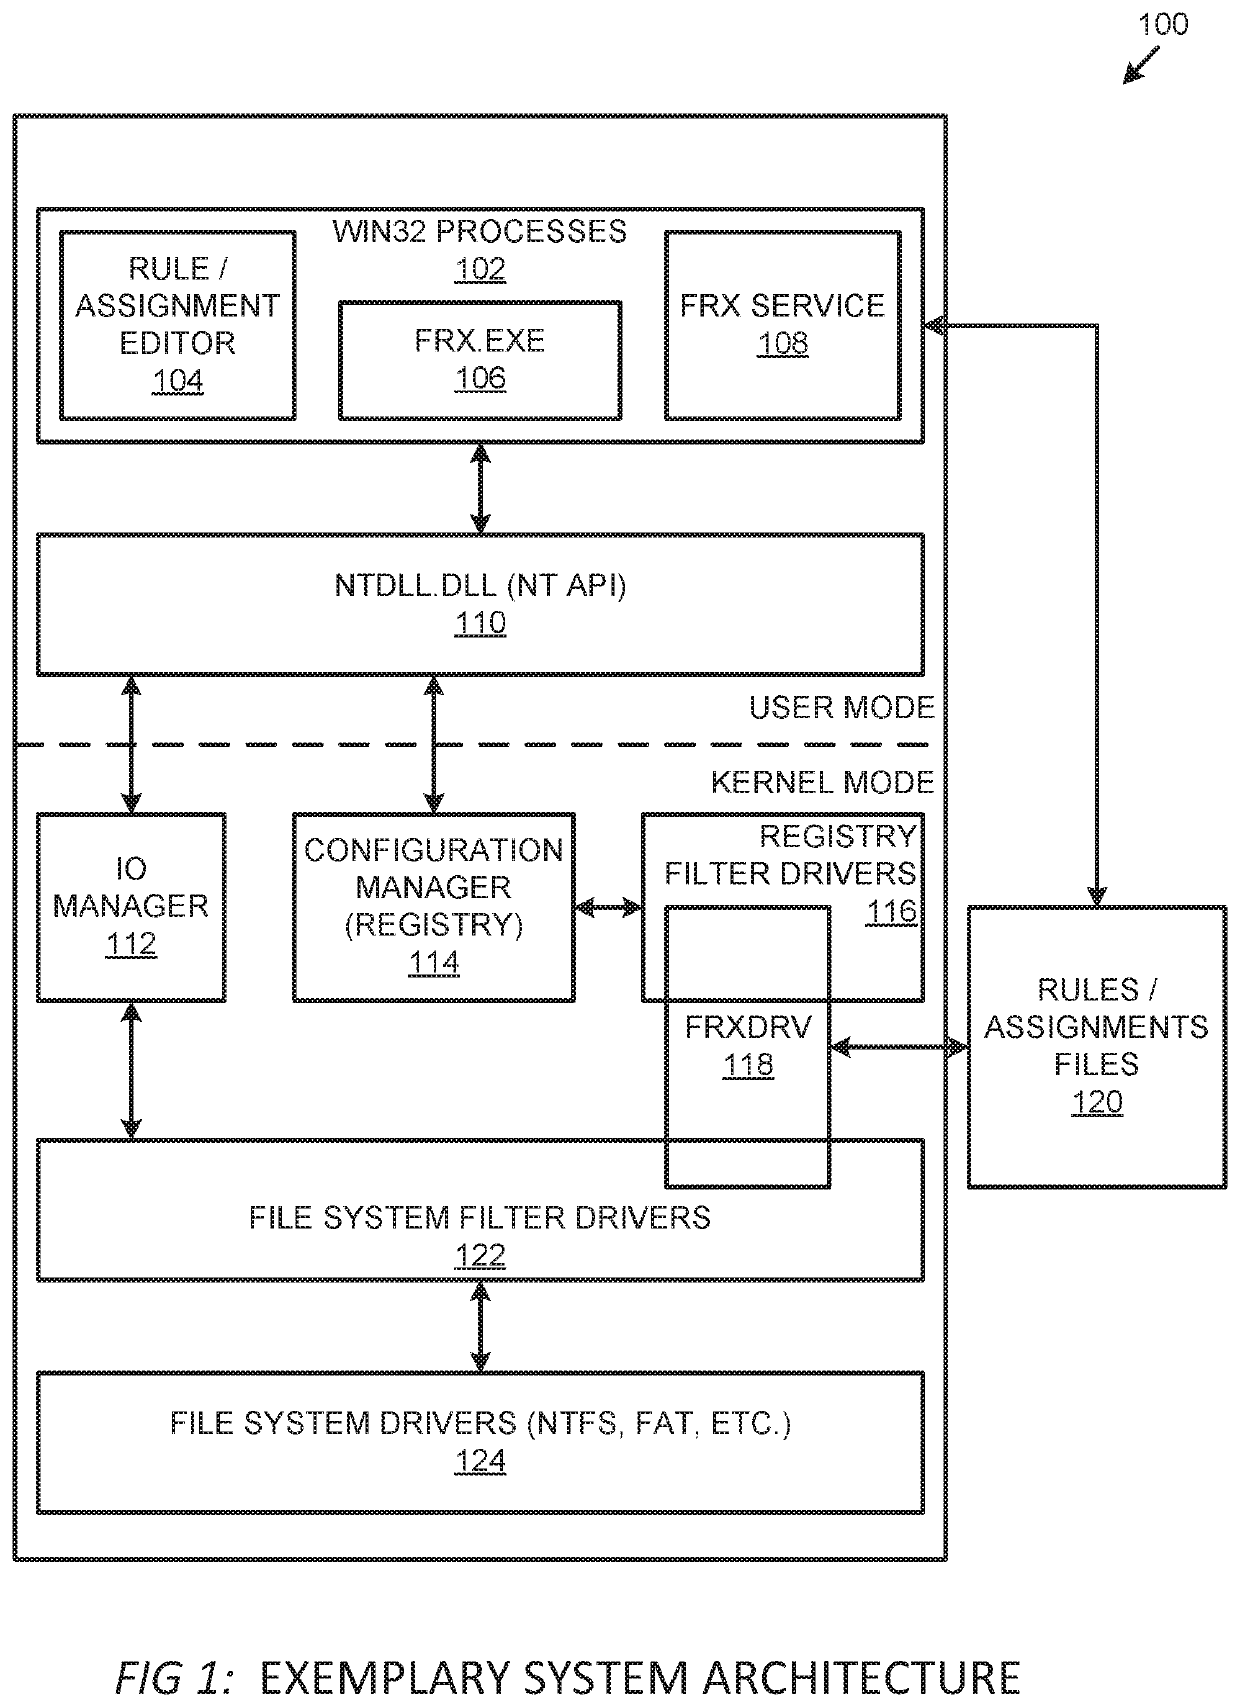 Systems and methods for accessing remote files